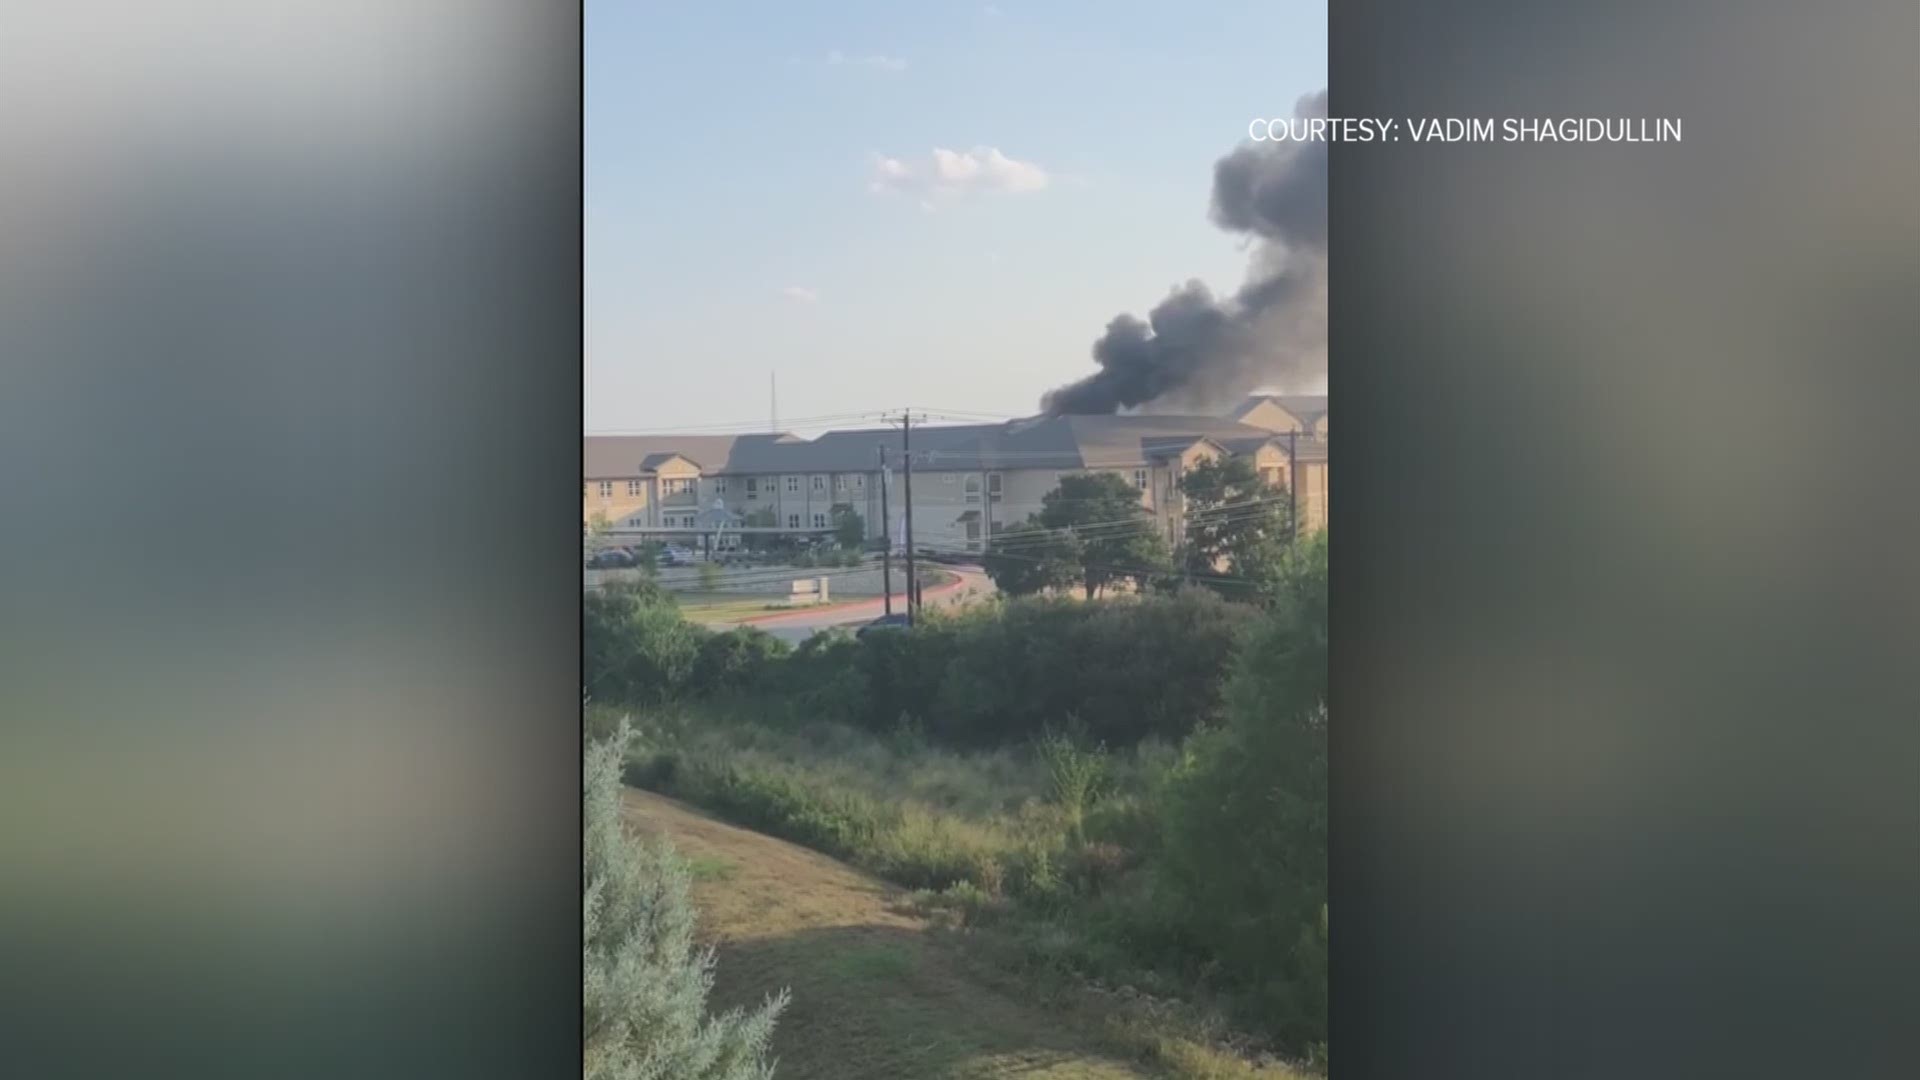 KVUE acquired this video from Vadim Shagidullin, which shows a fire at a Round Rock senior living center on August 16th.